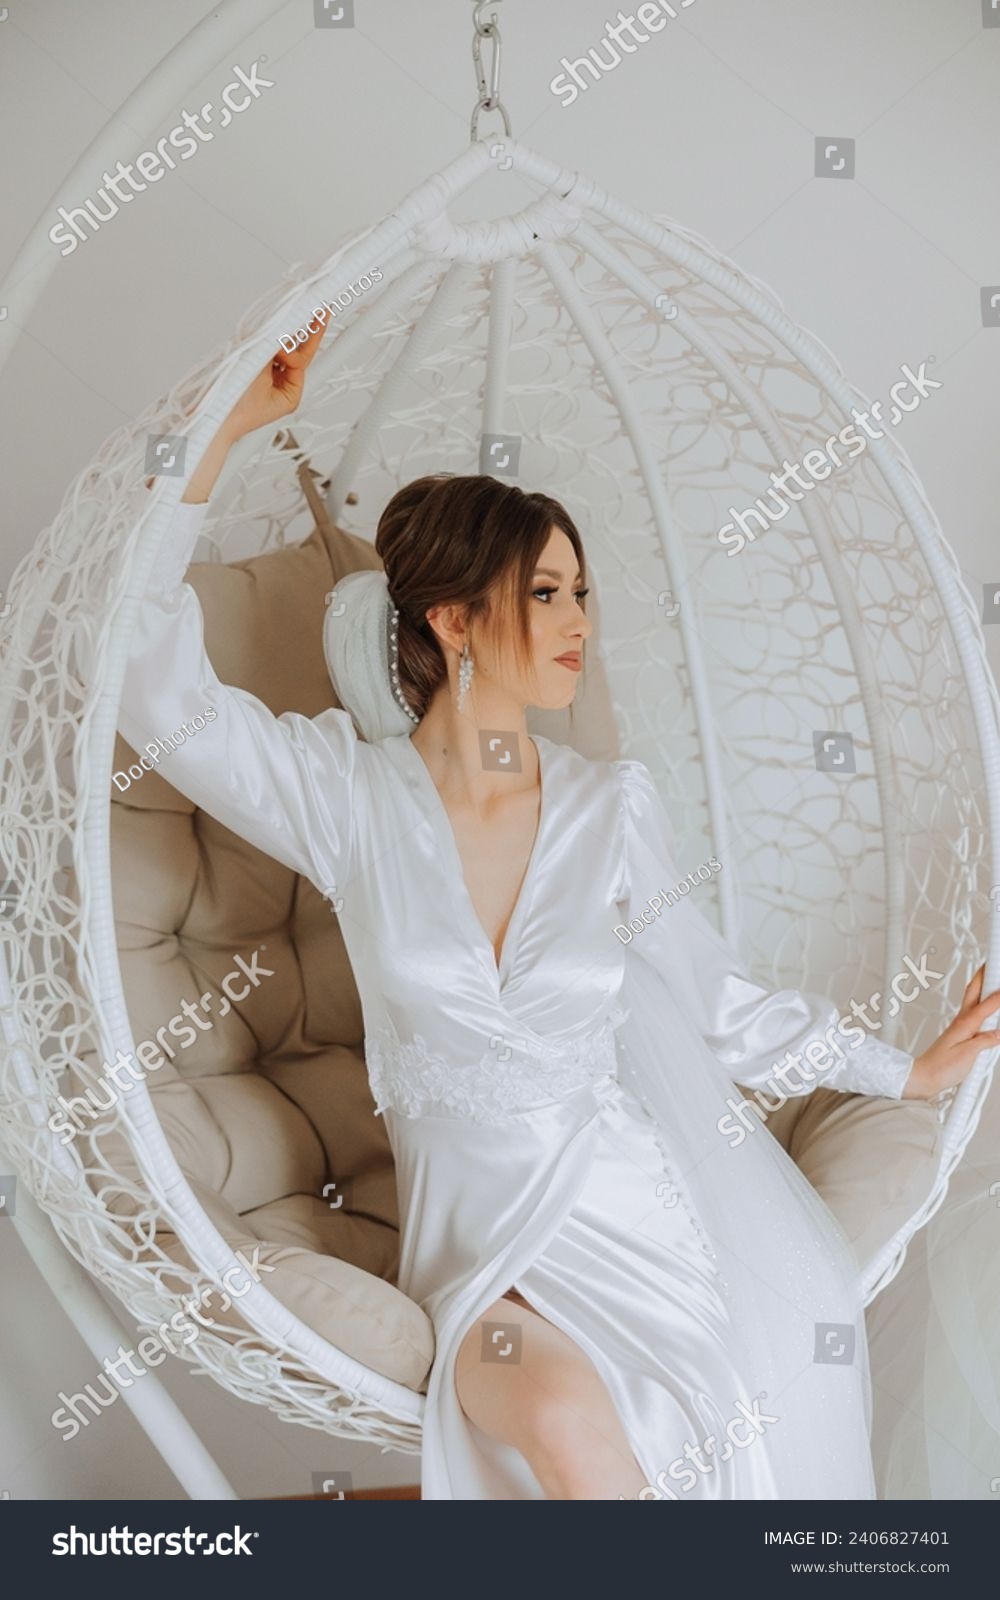 Morning of the bride in boudoir style. A woman bride in a white robe sits on a wicker swing near her wedding dress on a mannequin. Wedding day. #2406827401